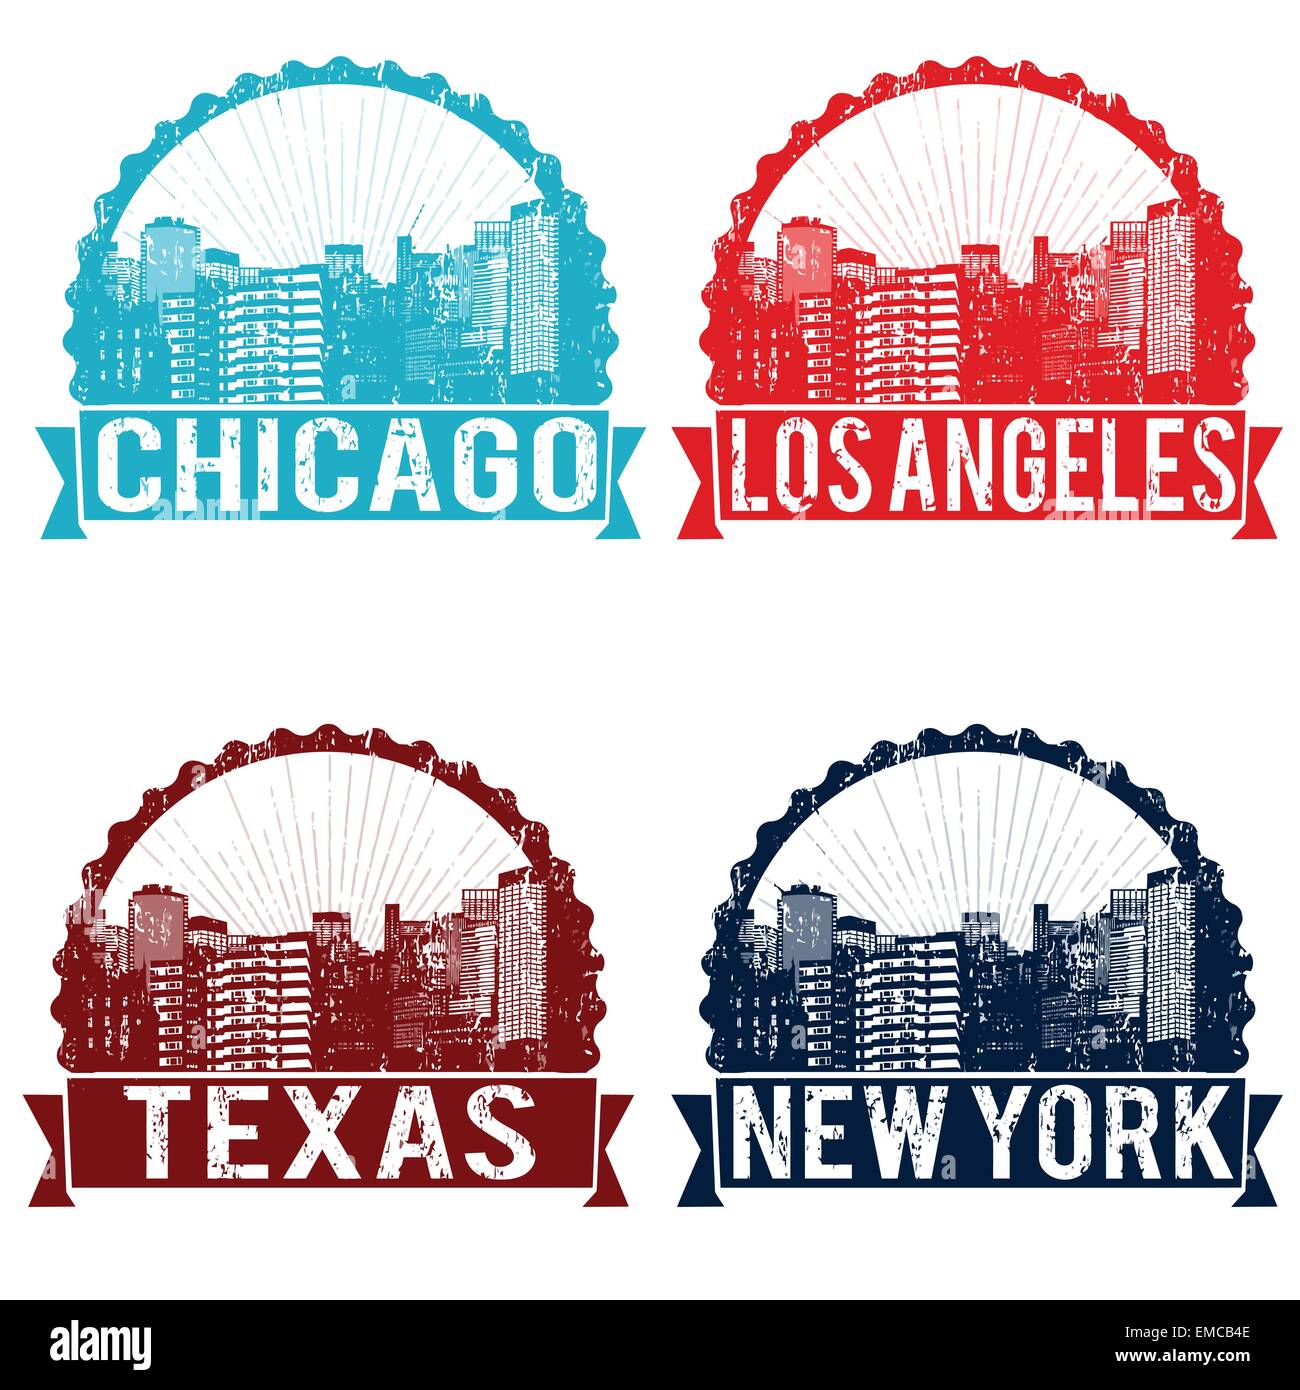 Chicago, Los Angeles, Texas and New York stamps Stock Vector